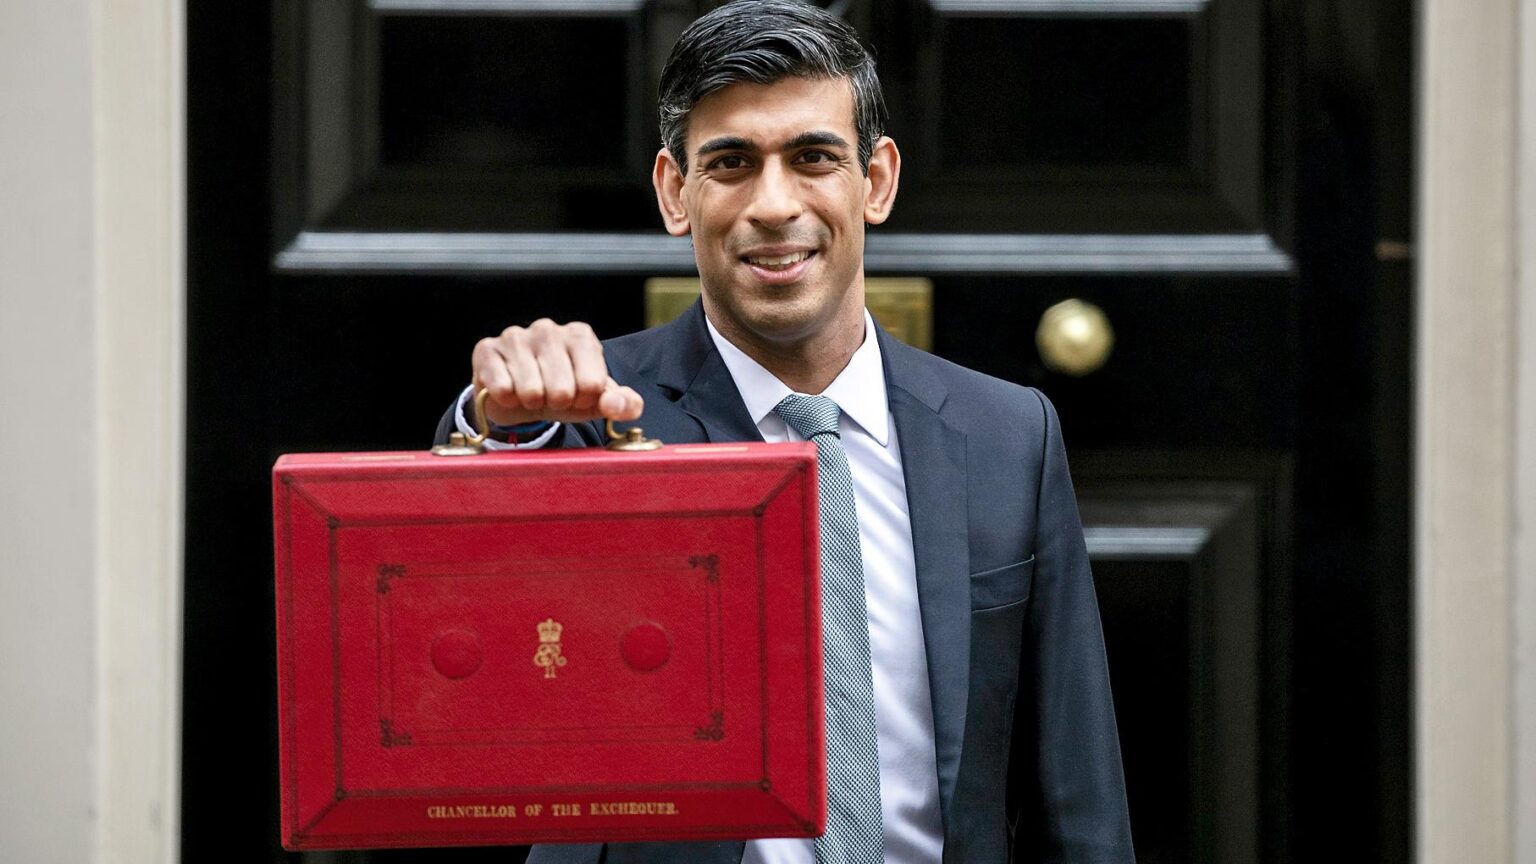 Spring statement: The key points in Chancellor Rishi Sunak’s mini-budget statement 